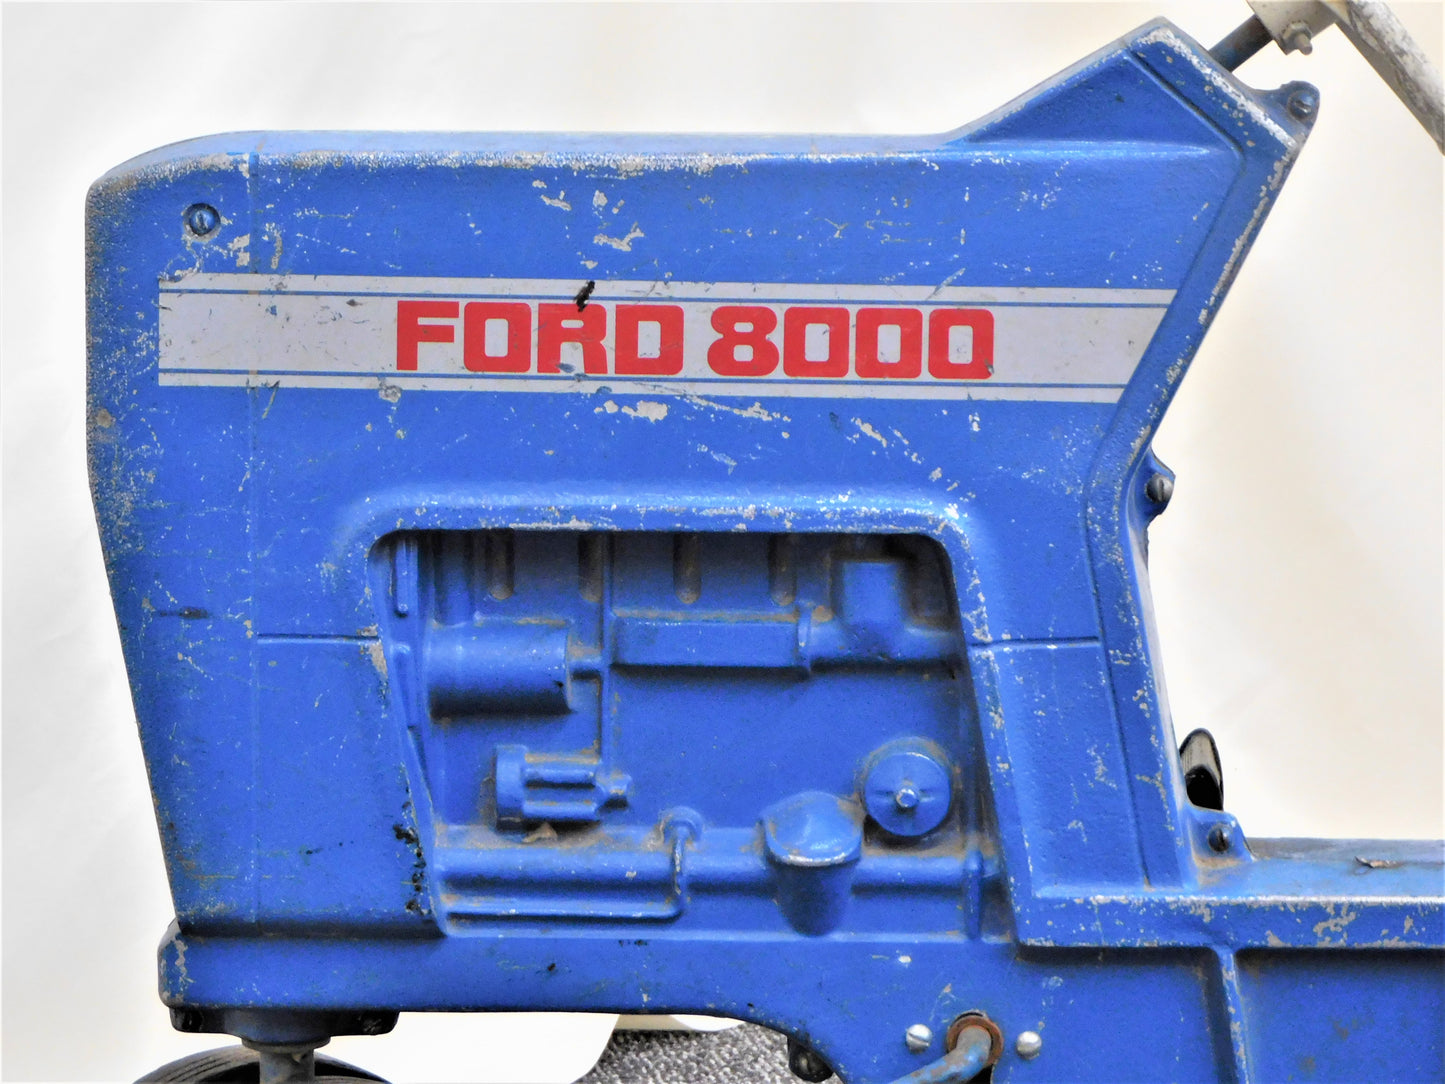 1968 Ford 8000 Pedal Tractor